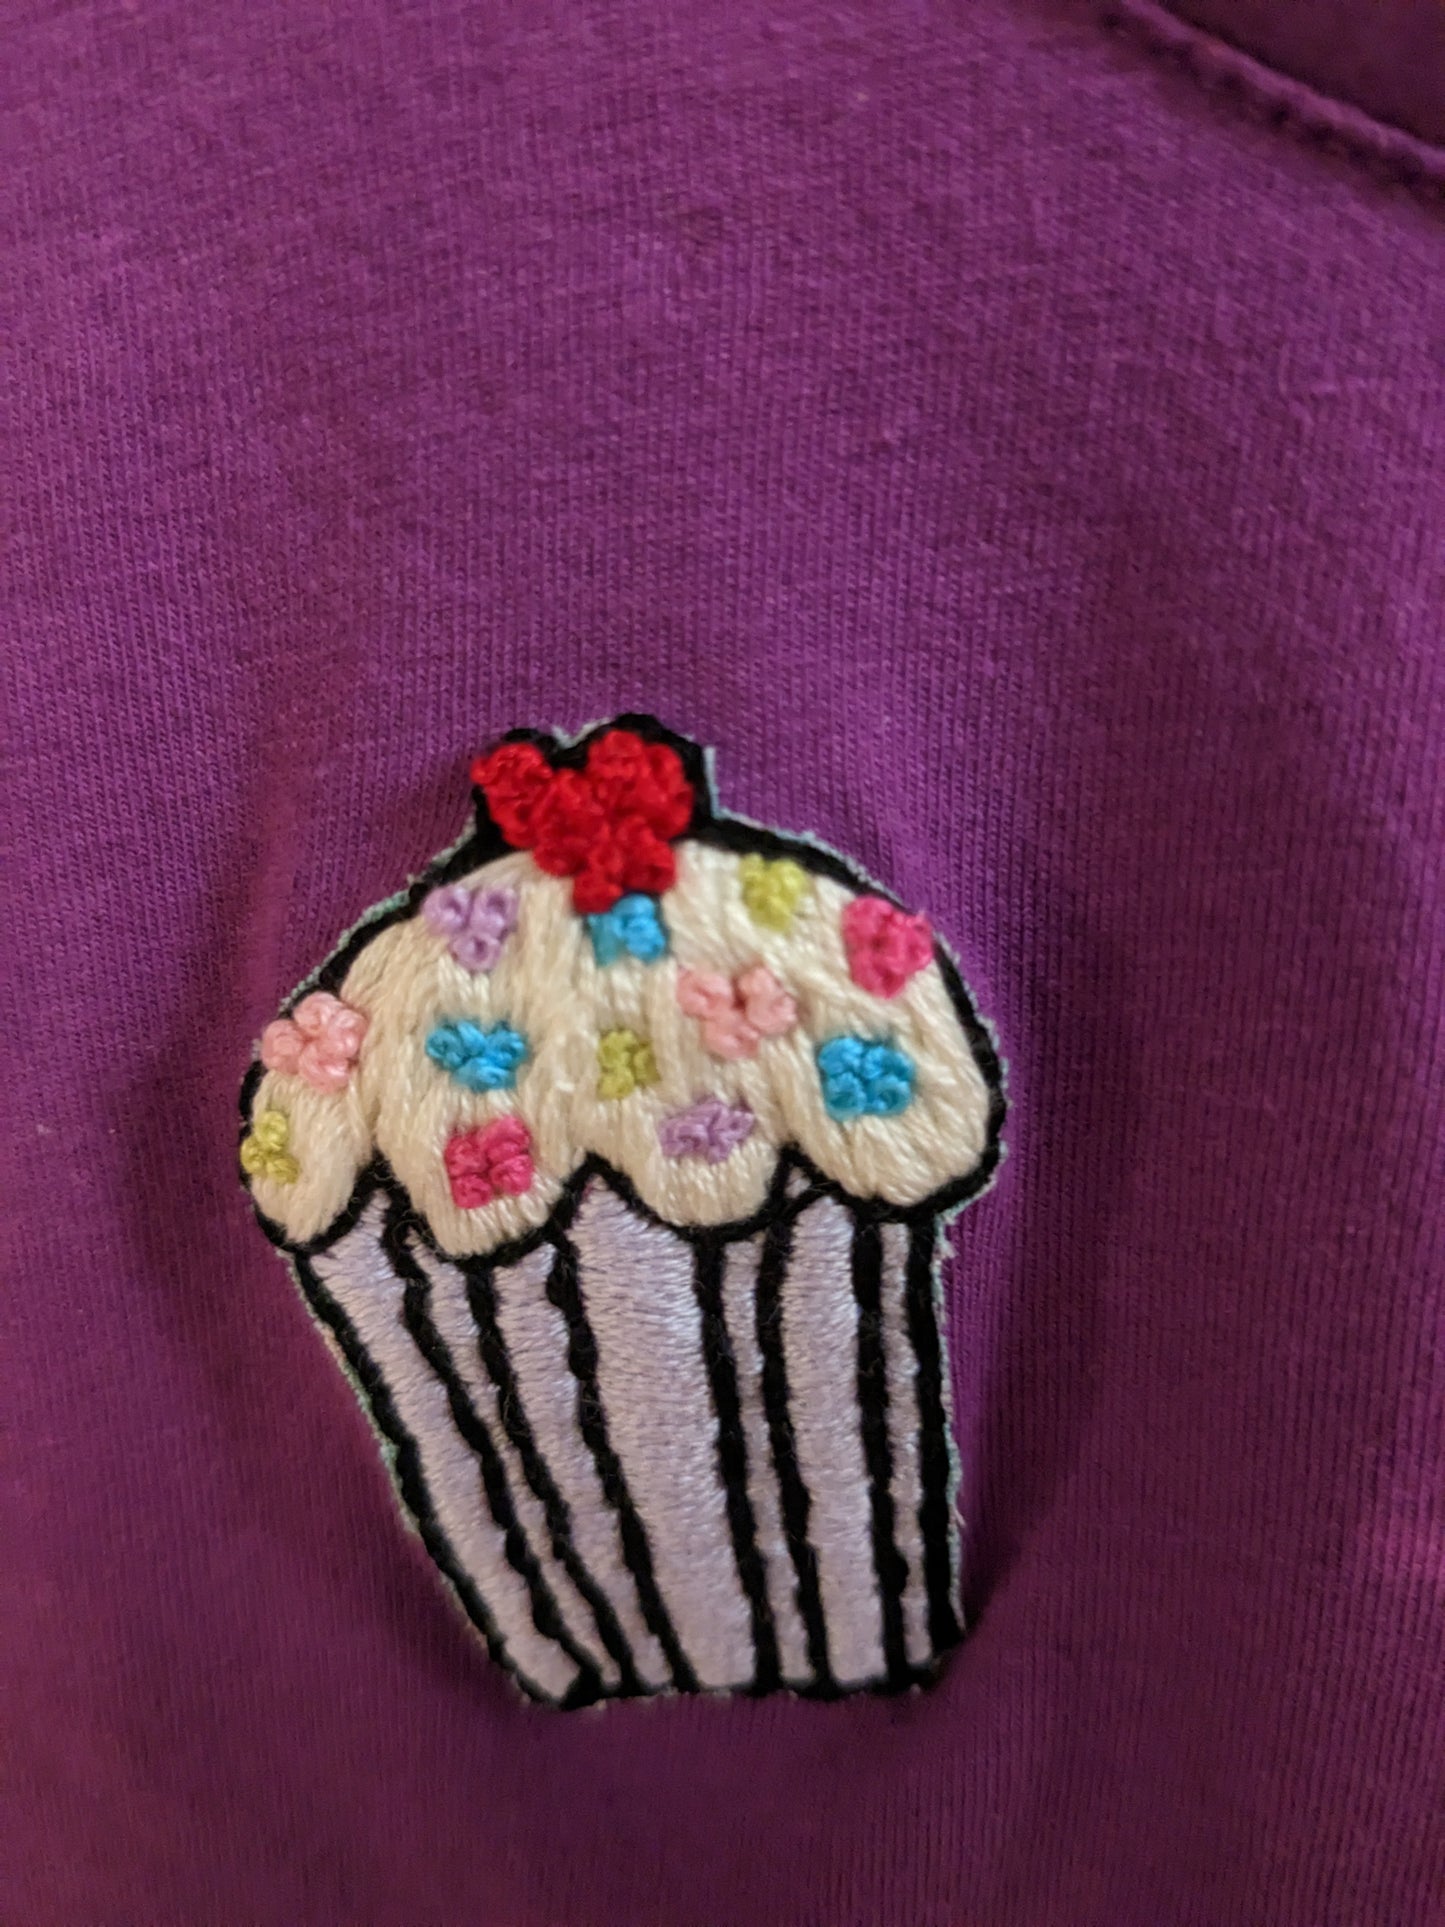 Cupcake embroidered essential tank, Grape